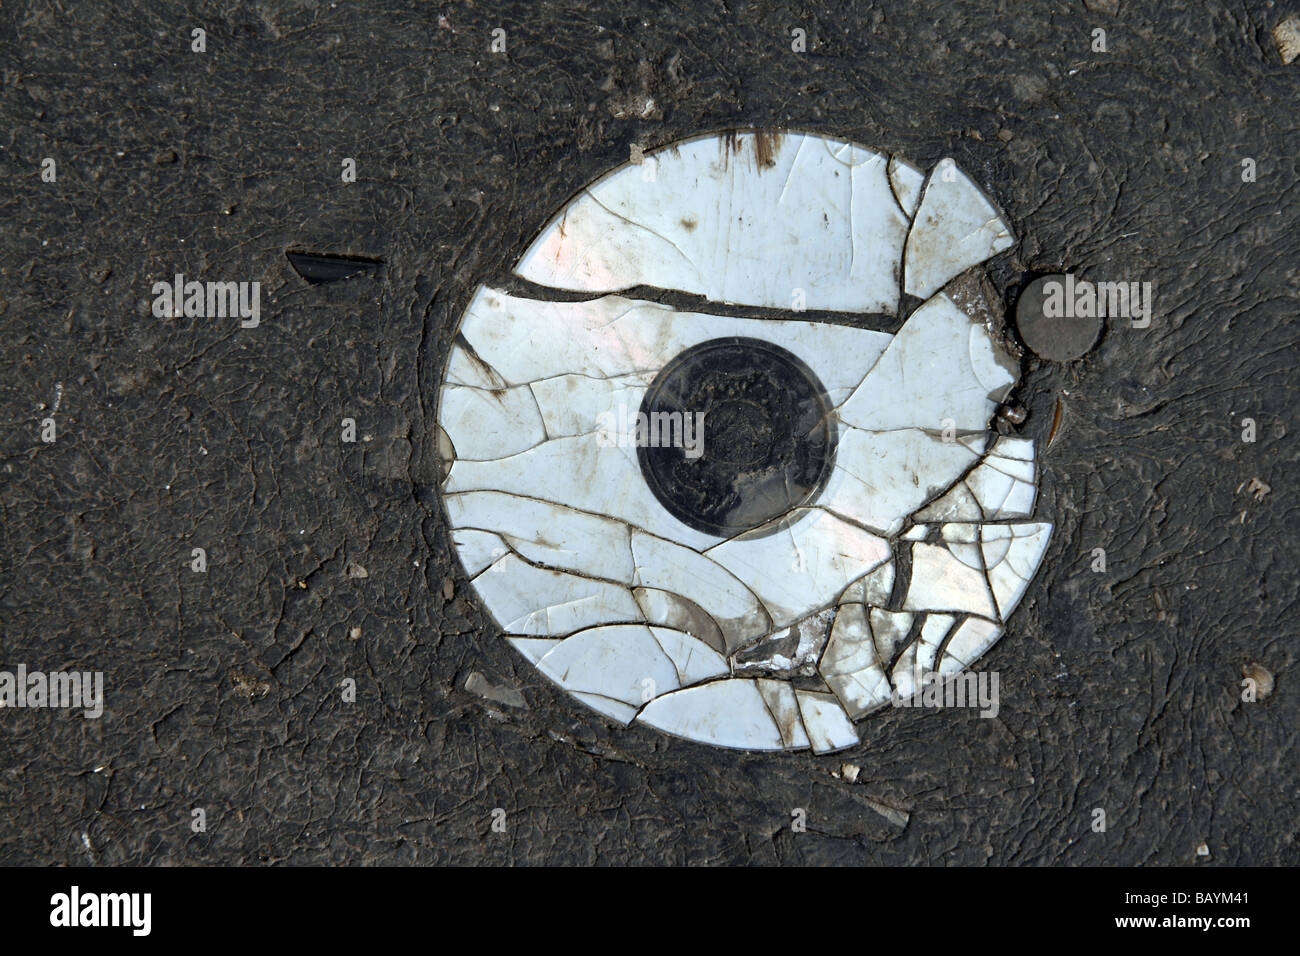 one old damaged cd compact disc disk on road surface Stock Photo